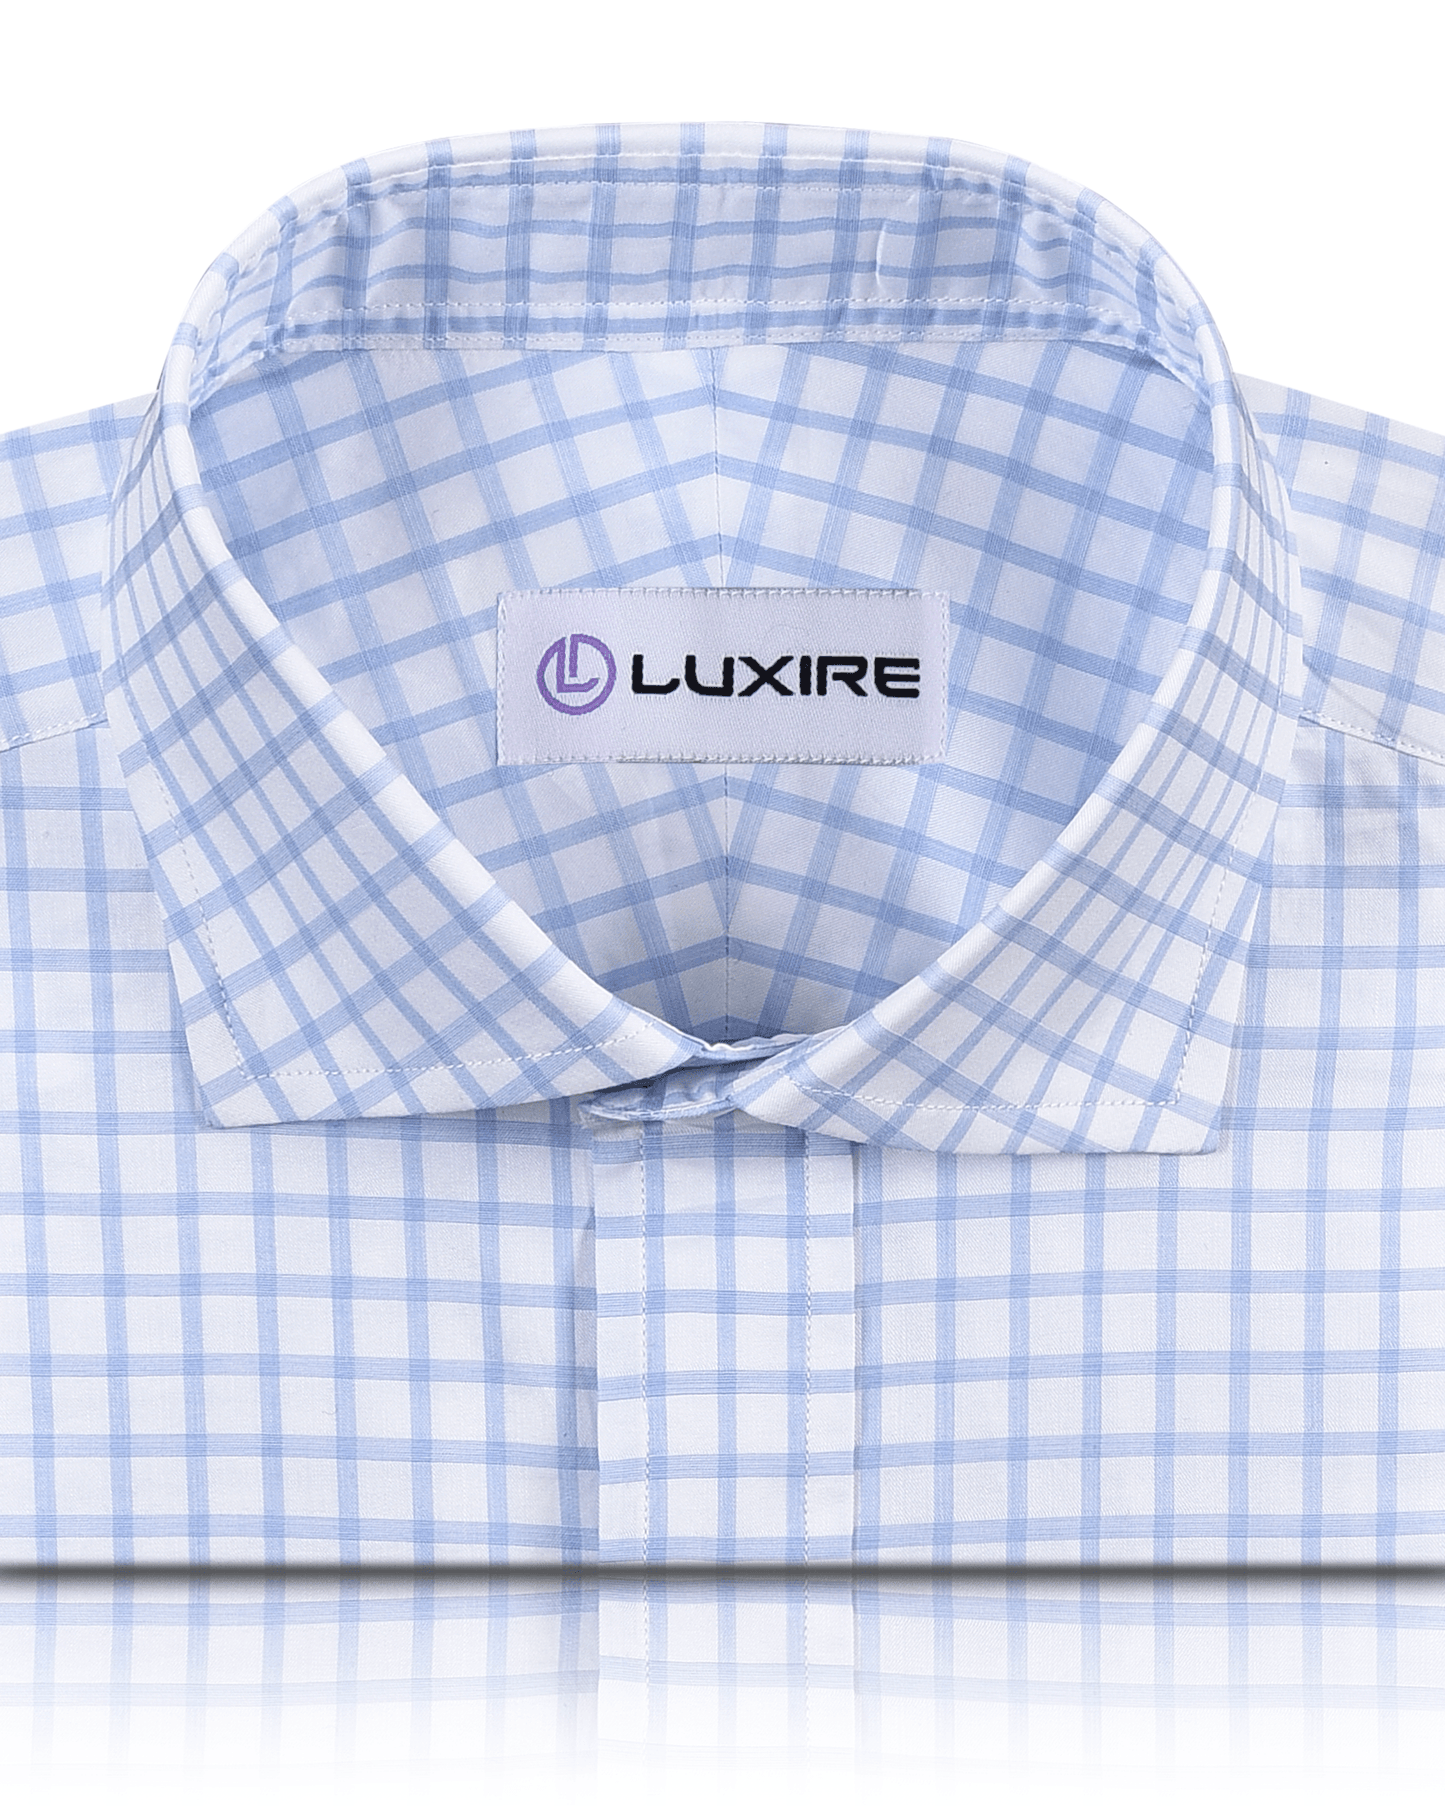 Front close view of custom check shirts for men by Luxire light blue plaid